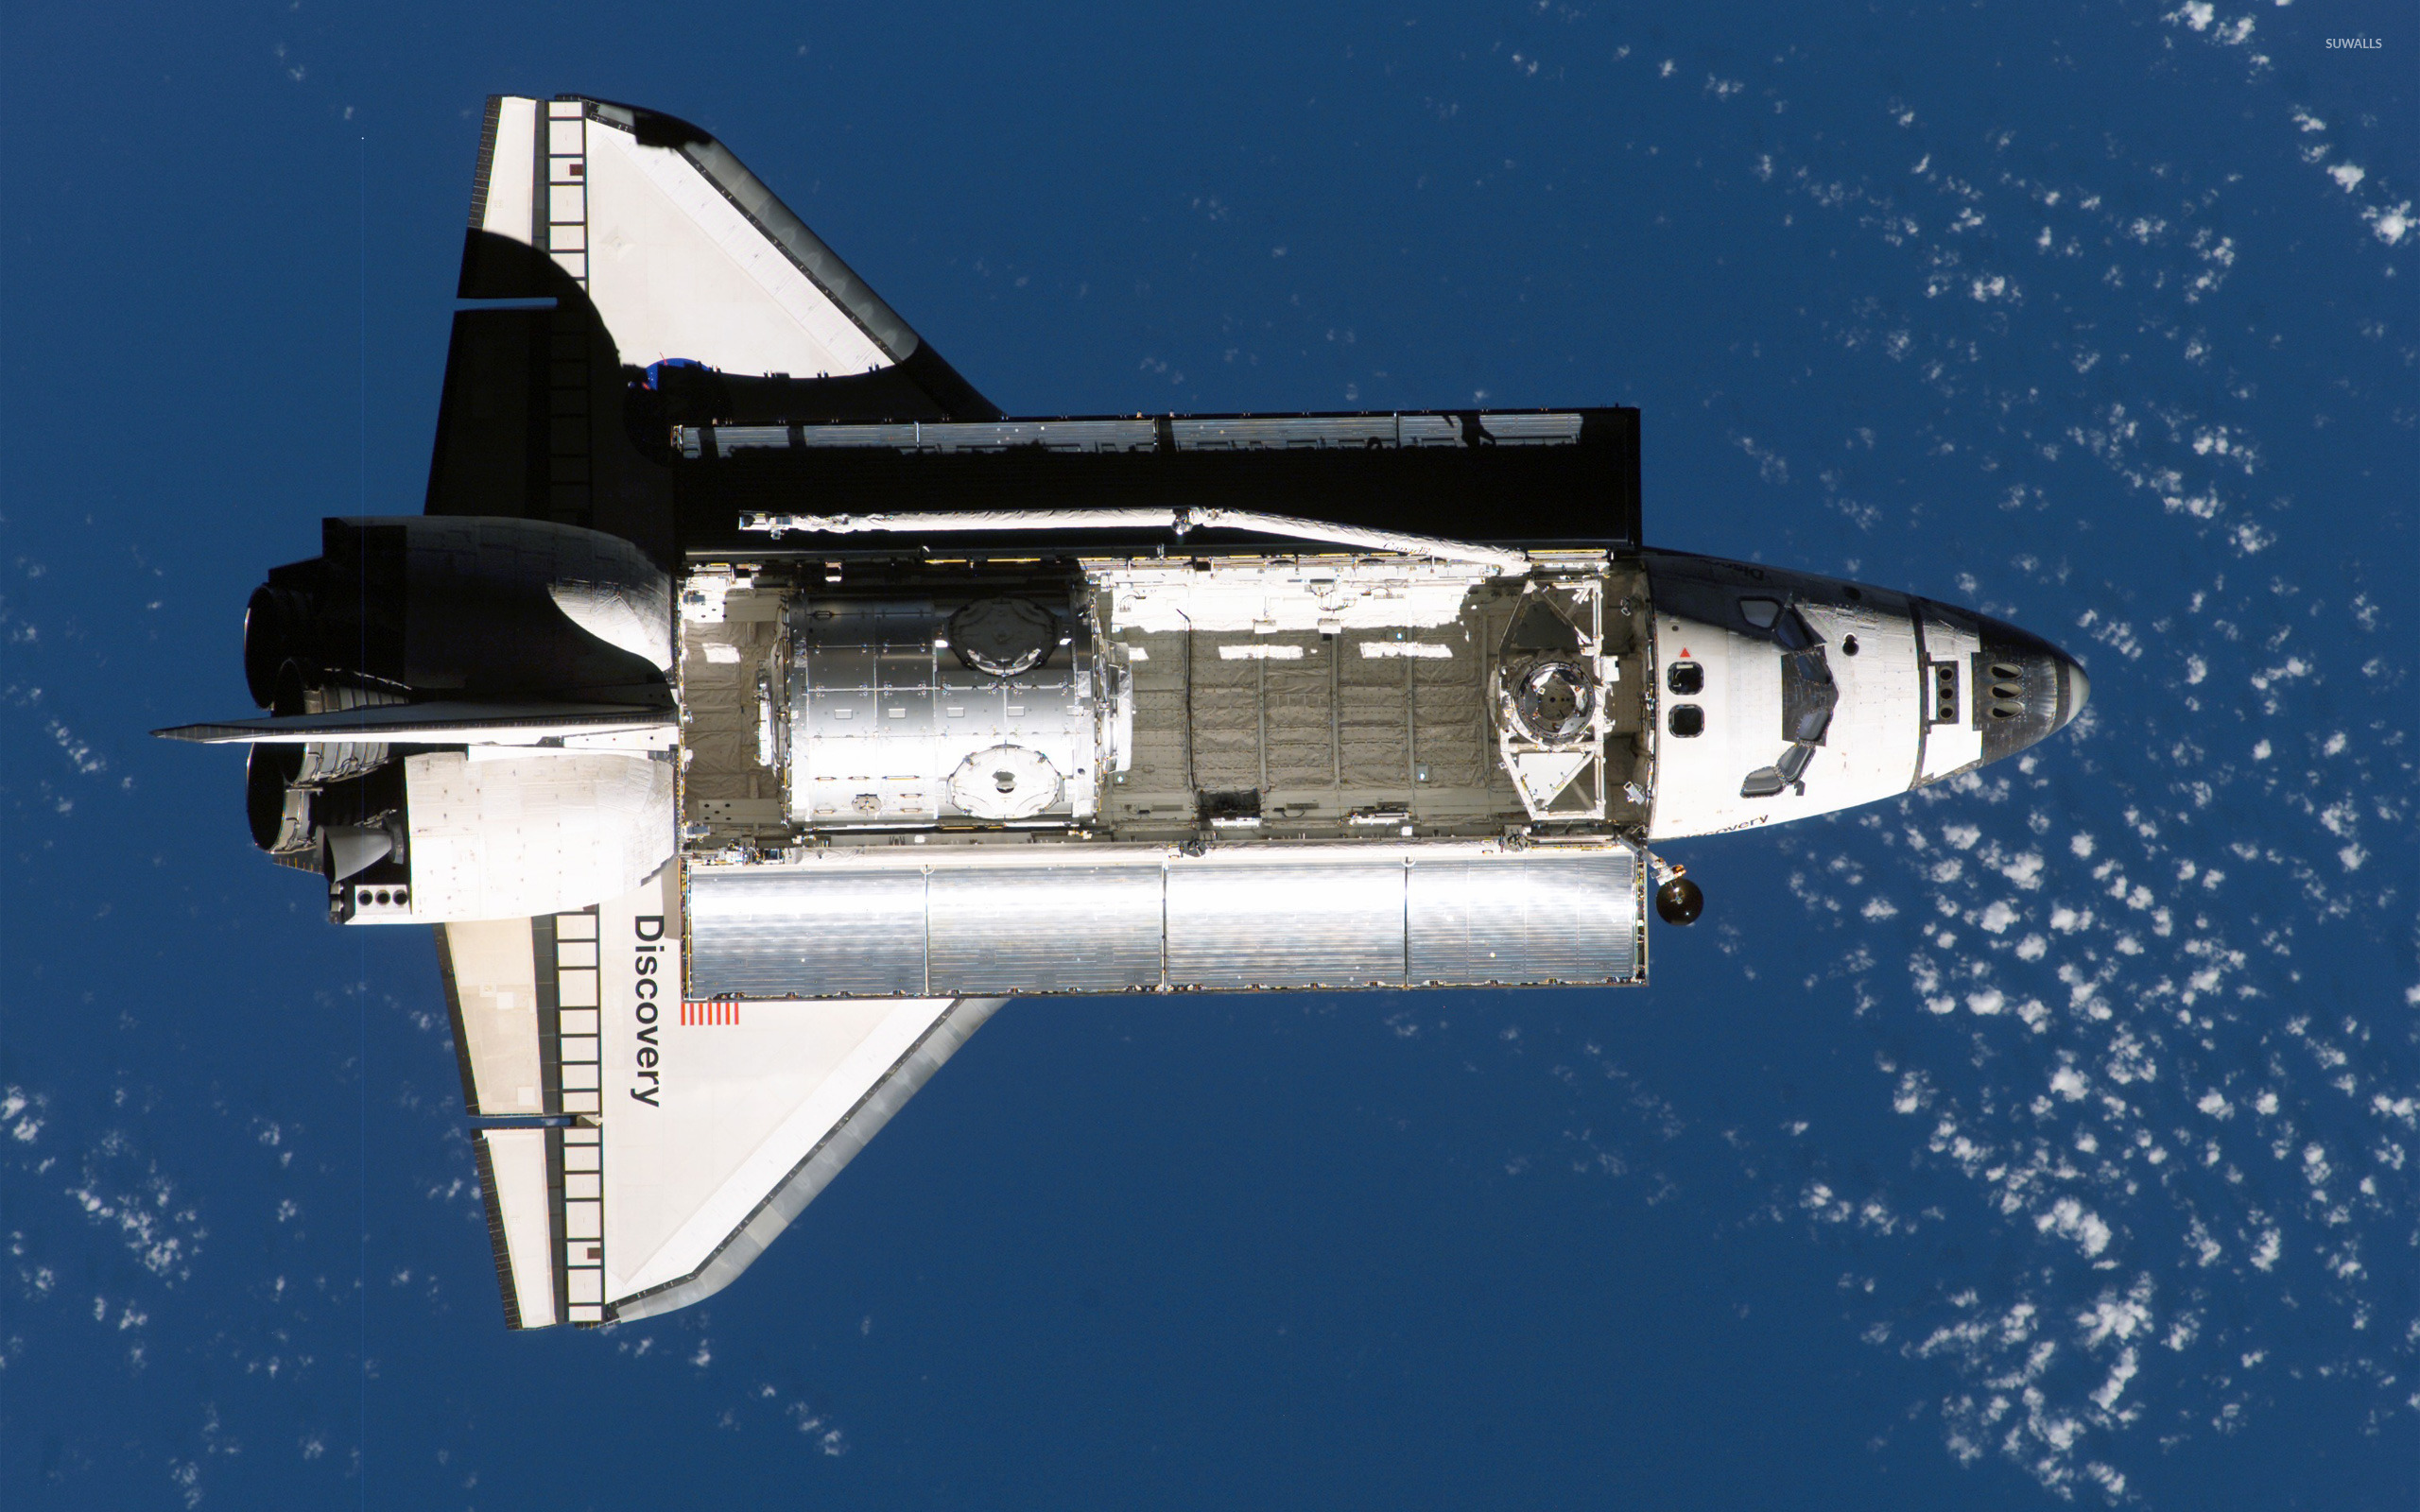 Space Shuttle Discovery wallpaper - Space wallpapers - #11428